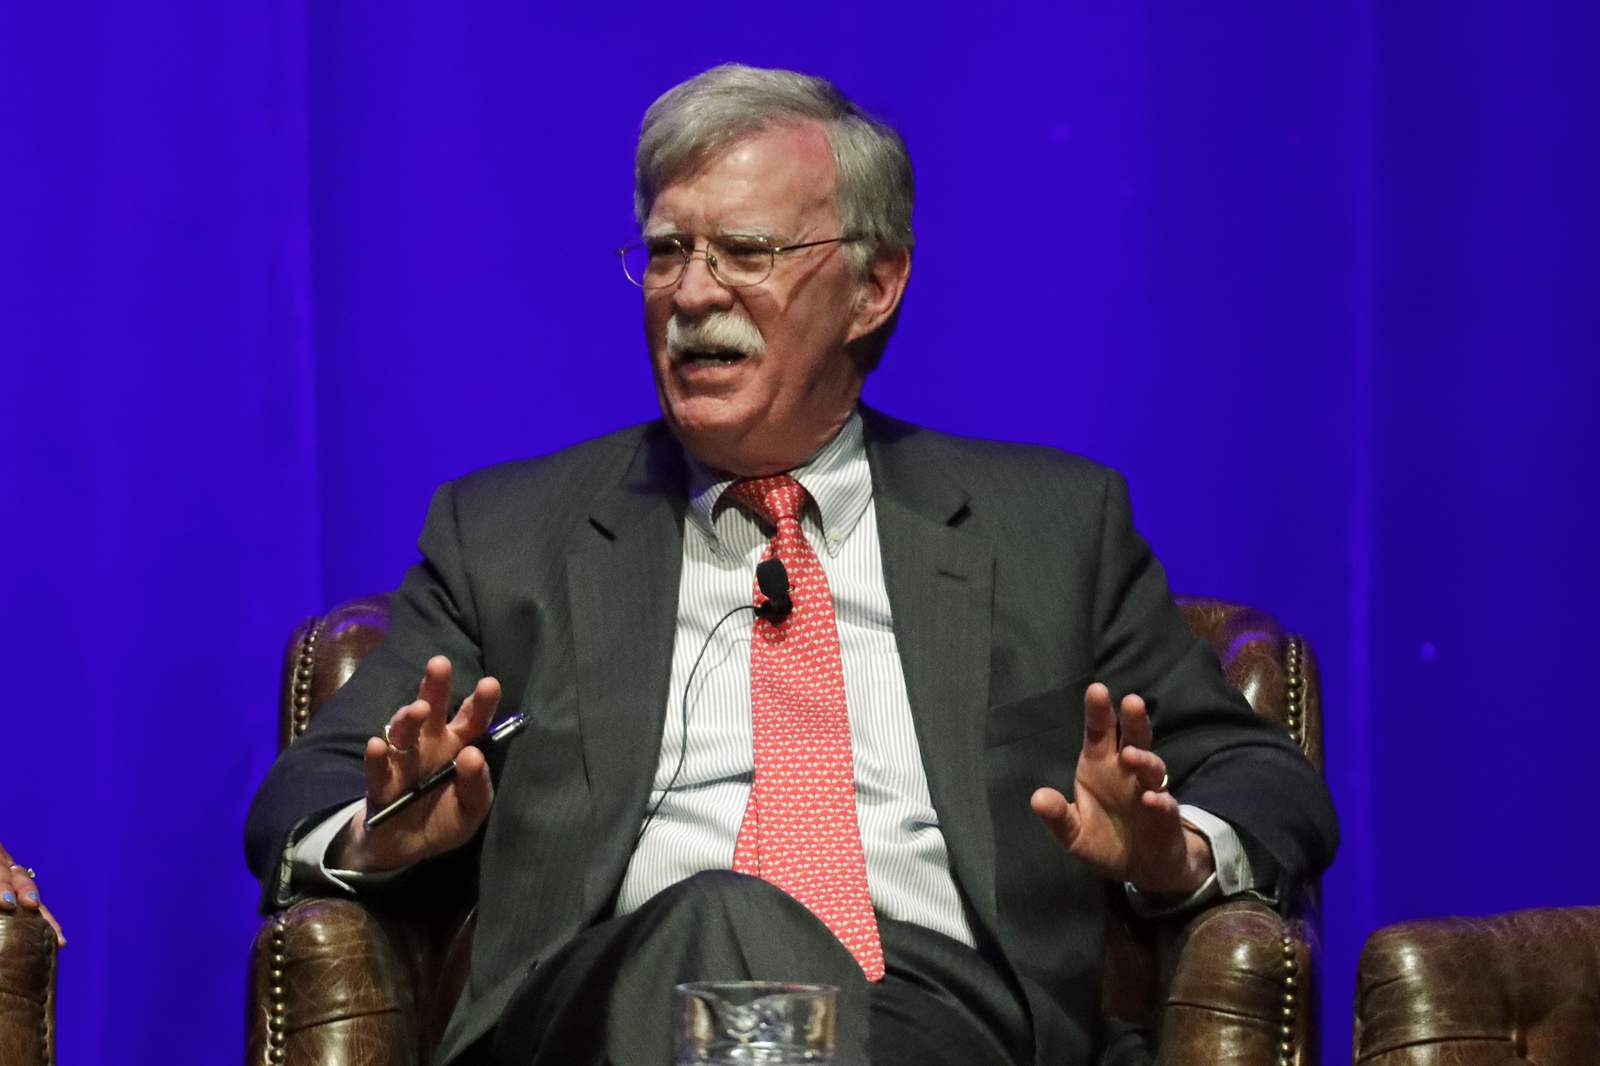 Trump administration sues to delay release of Bolton book